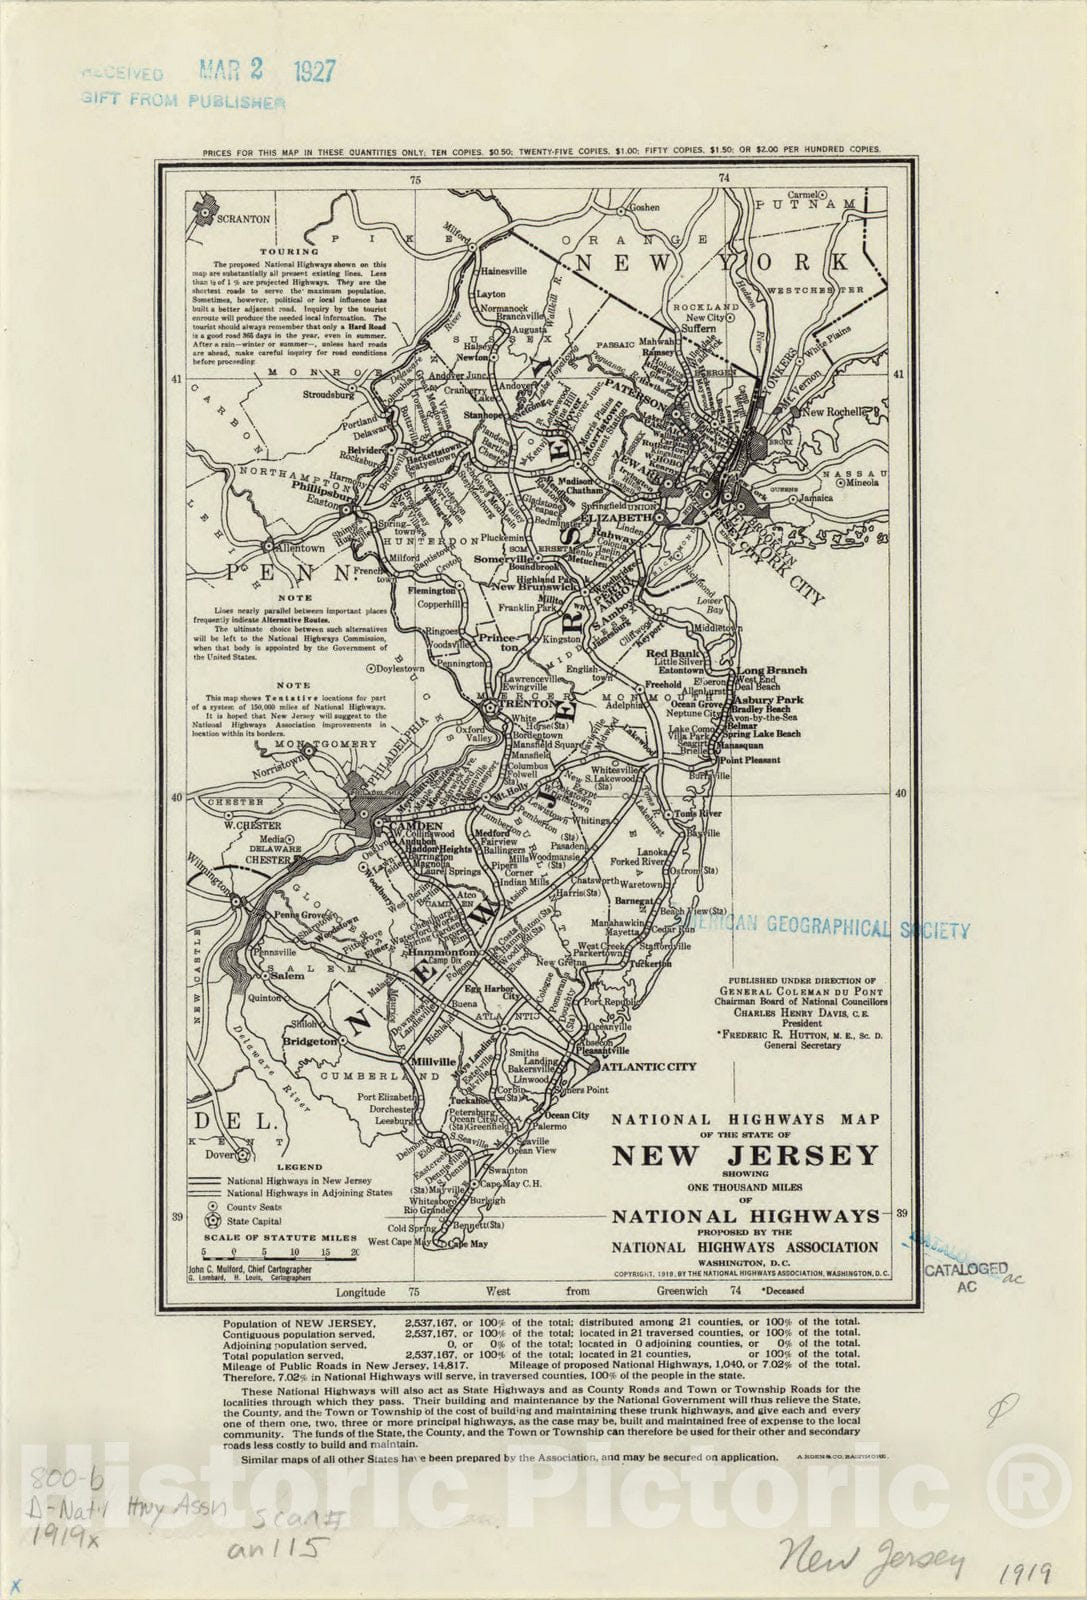 Map : New Jersey 1919, National highways map of the state of New Jersey : showing one thousand miles of national highways